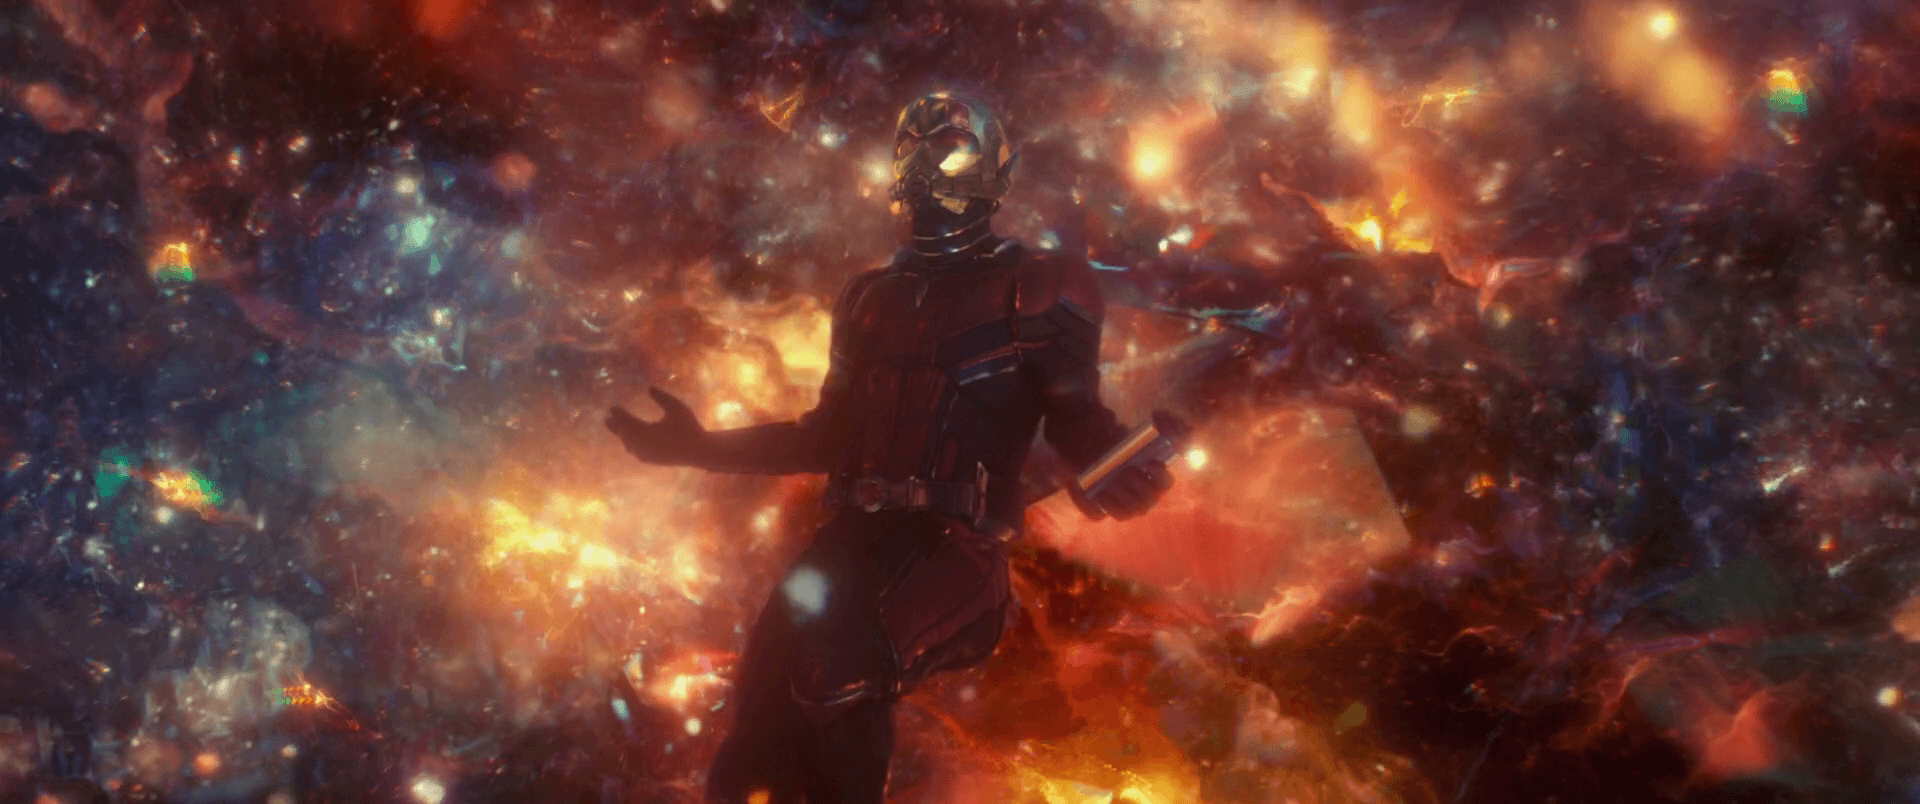 Avengers 4': Kevin Feige Explains Why Quantum Realm Is Important